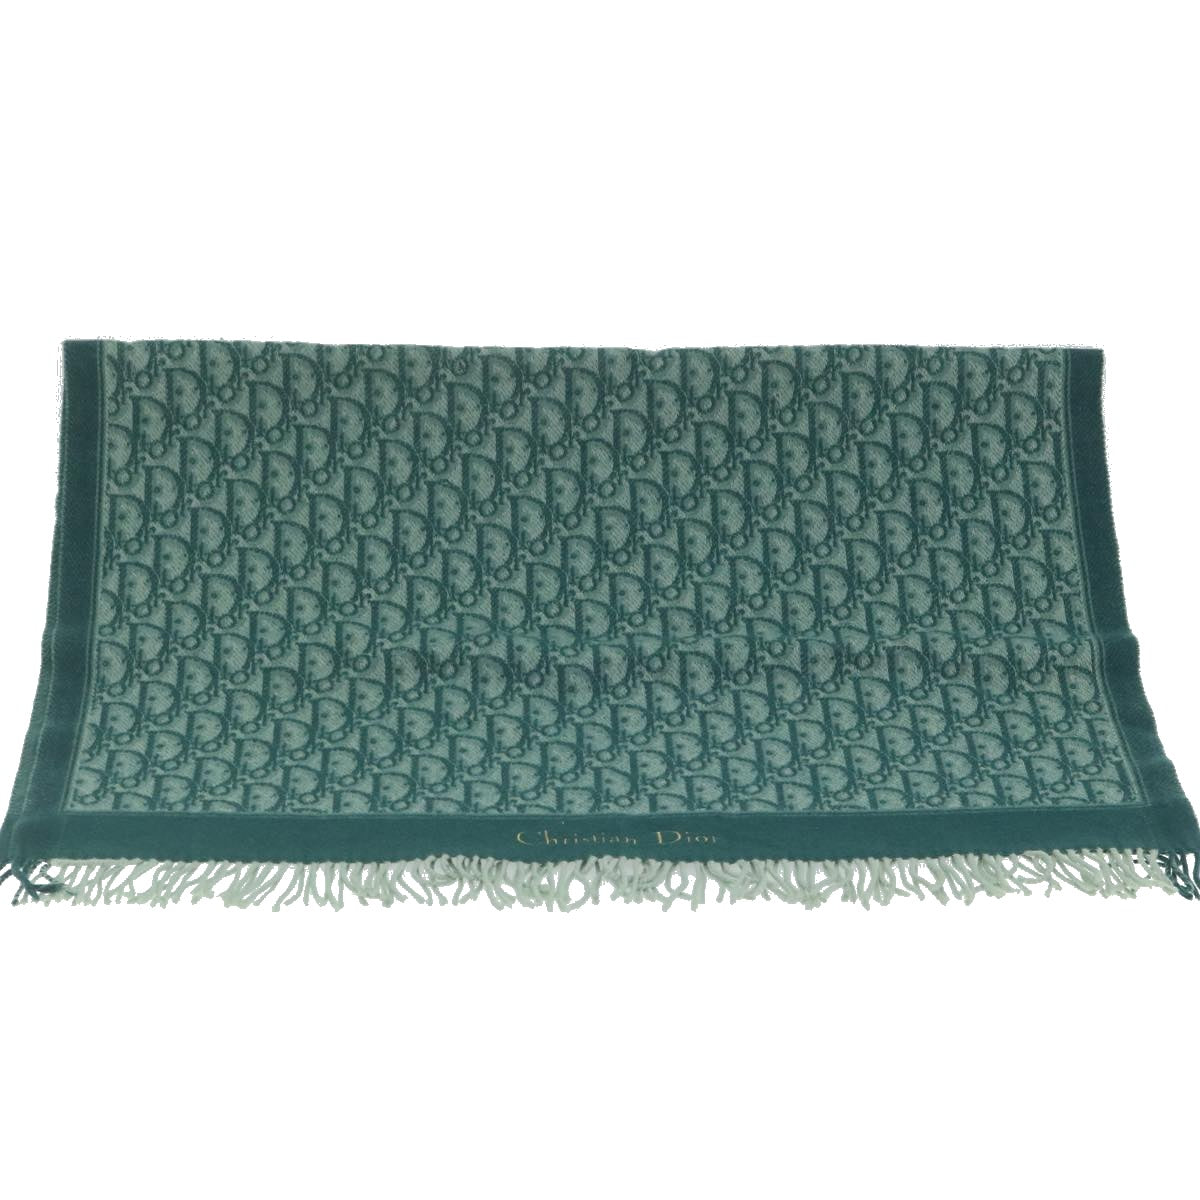 Christian Dior Trotter Canvas Lap Blanket Towel Green Auth am5307 - 0